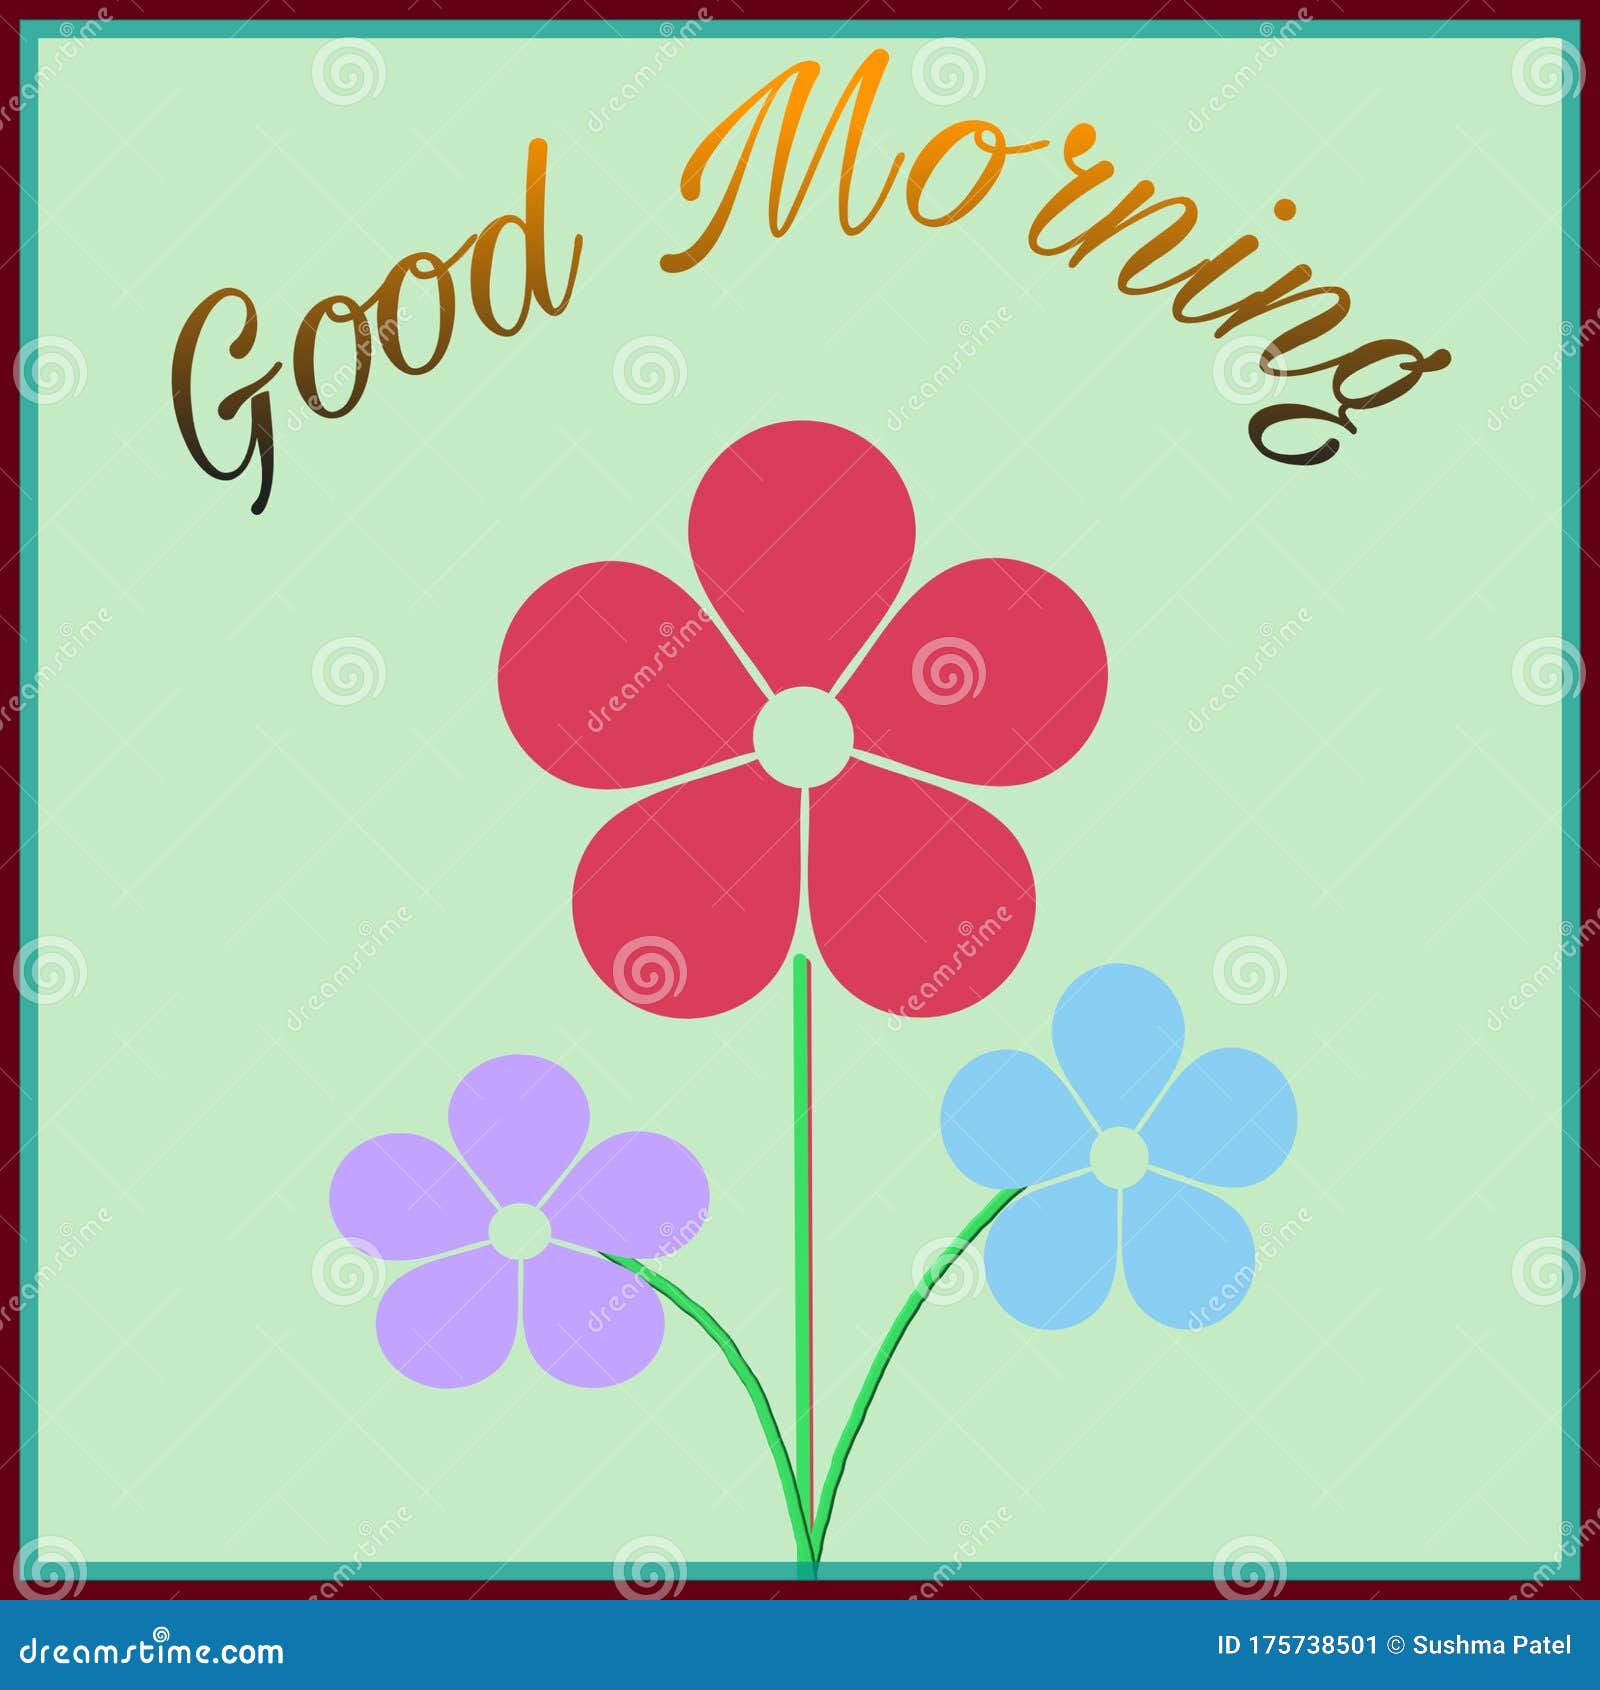 Good Morning Wishes with Flowers Illustration Stock Illustration ...